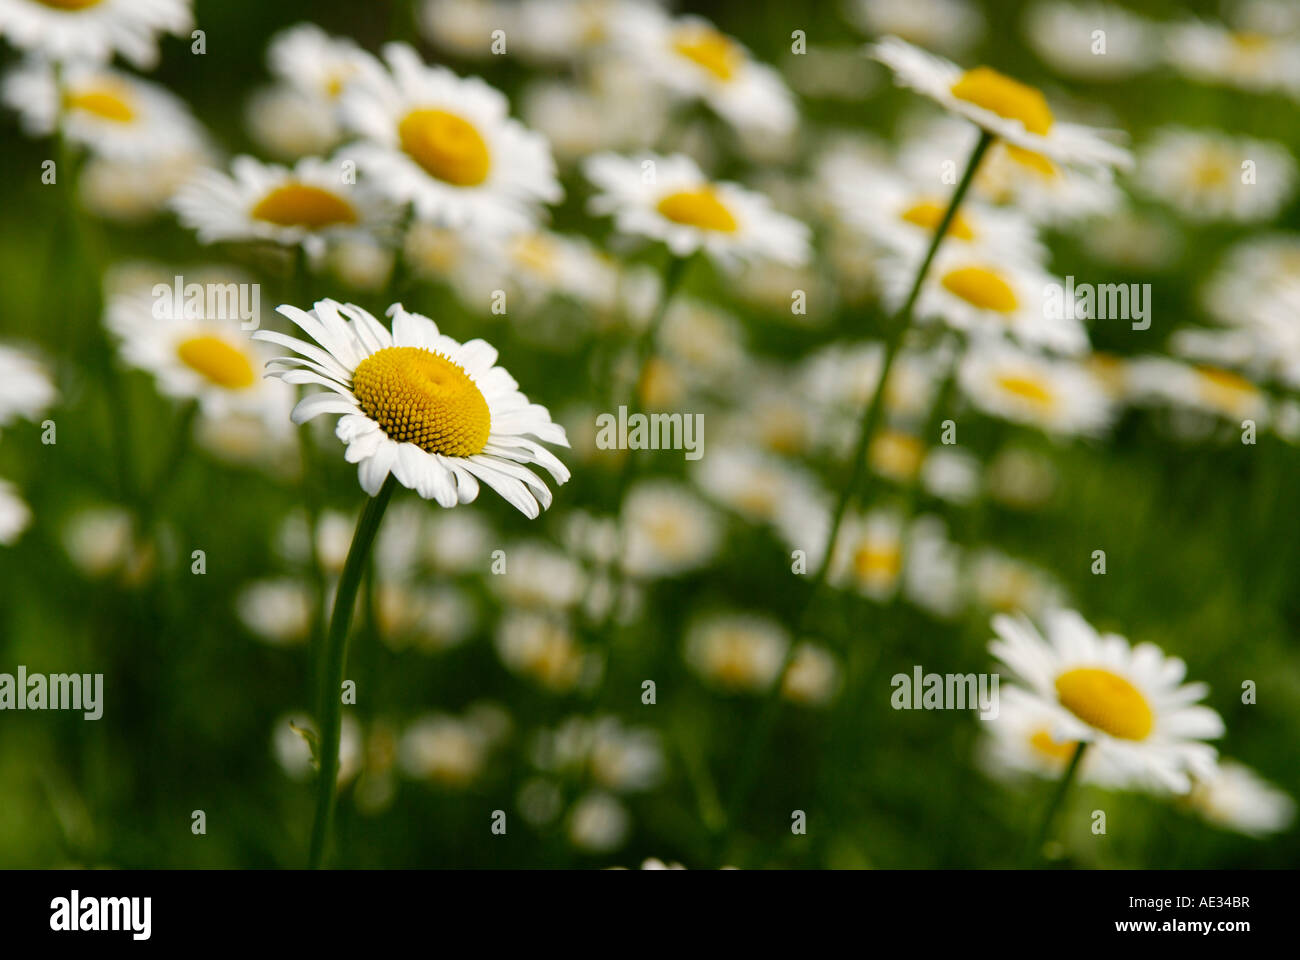 Selective focus isolating a single Oxeye daisy Leucanthemum vulgare against a group of them Sterling Forest New York Stock Photo